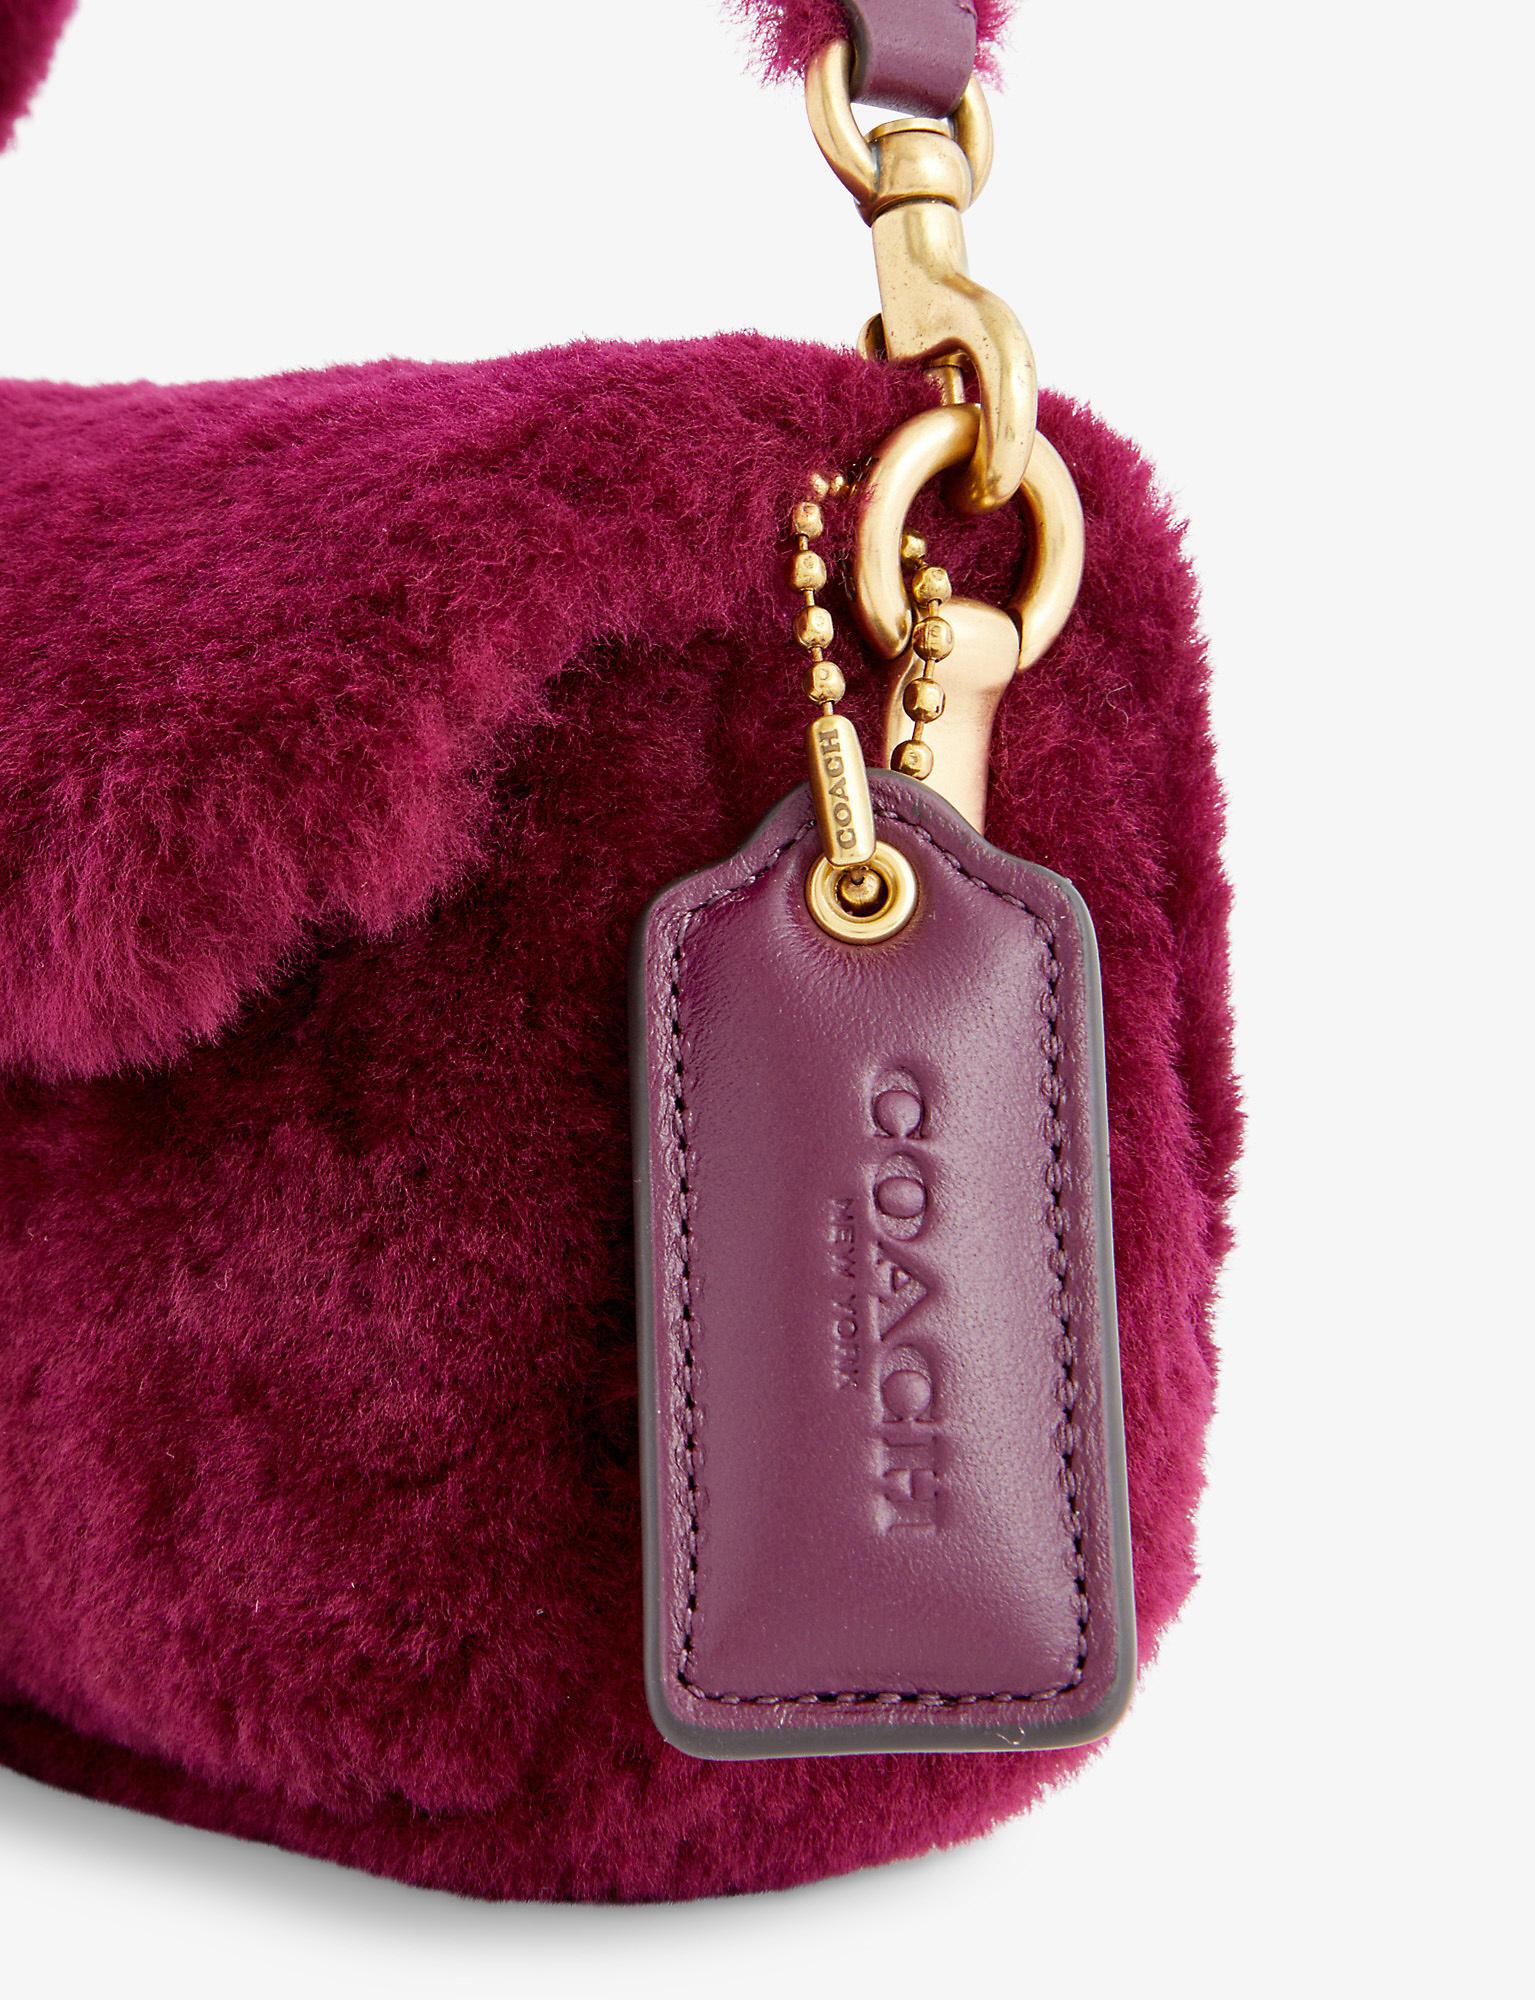 COACH Pillow Tabby Shearling And Leather Cross-body Bag in Red | Lyst